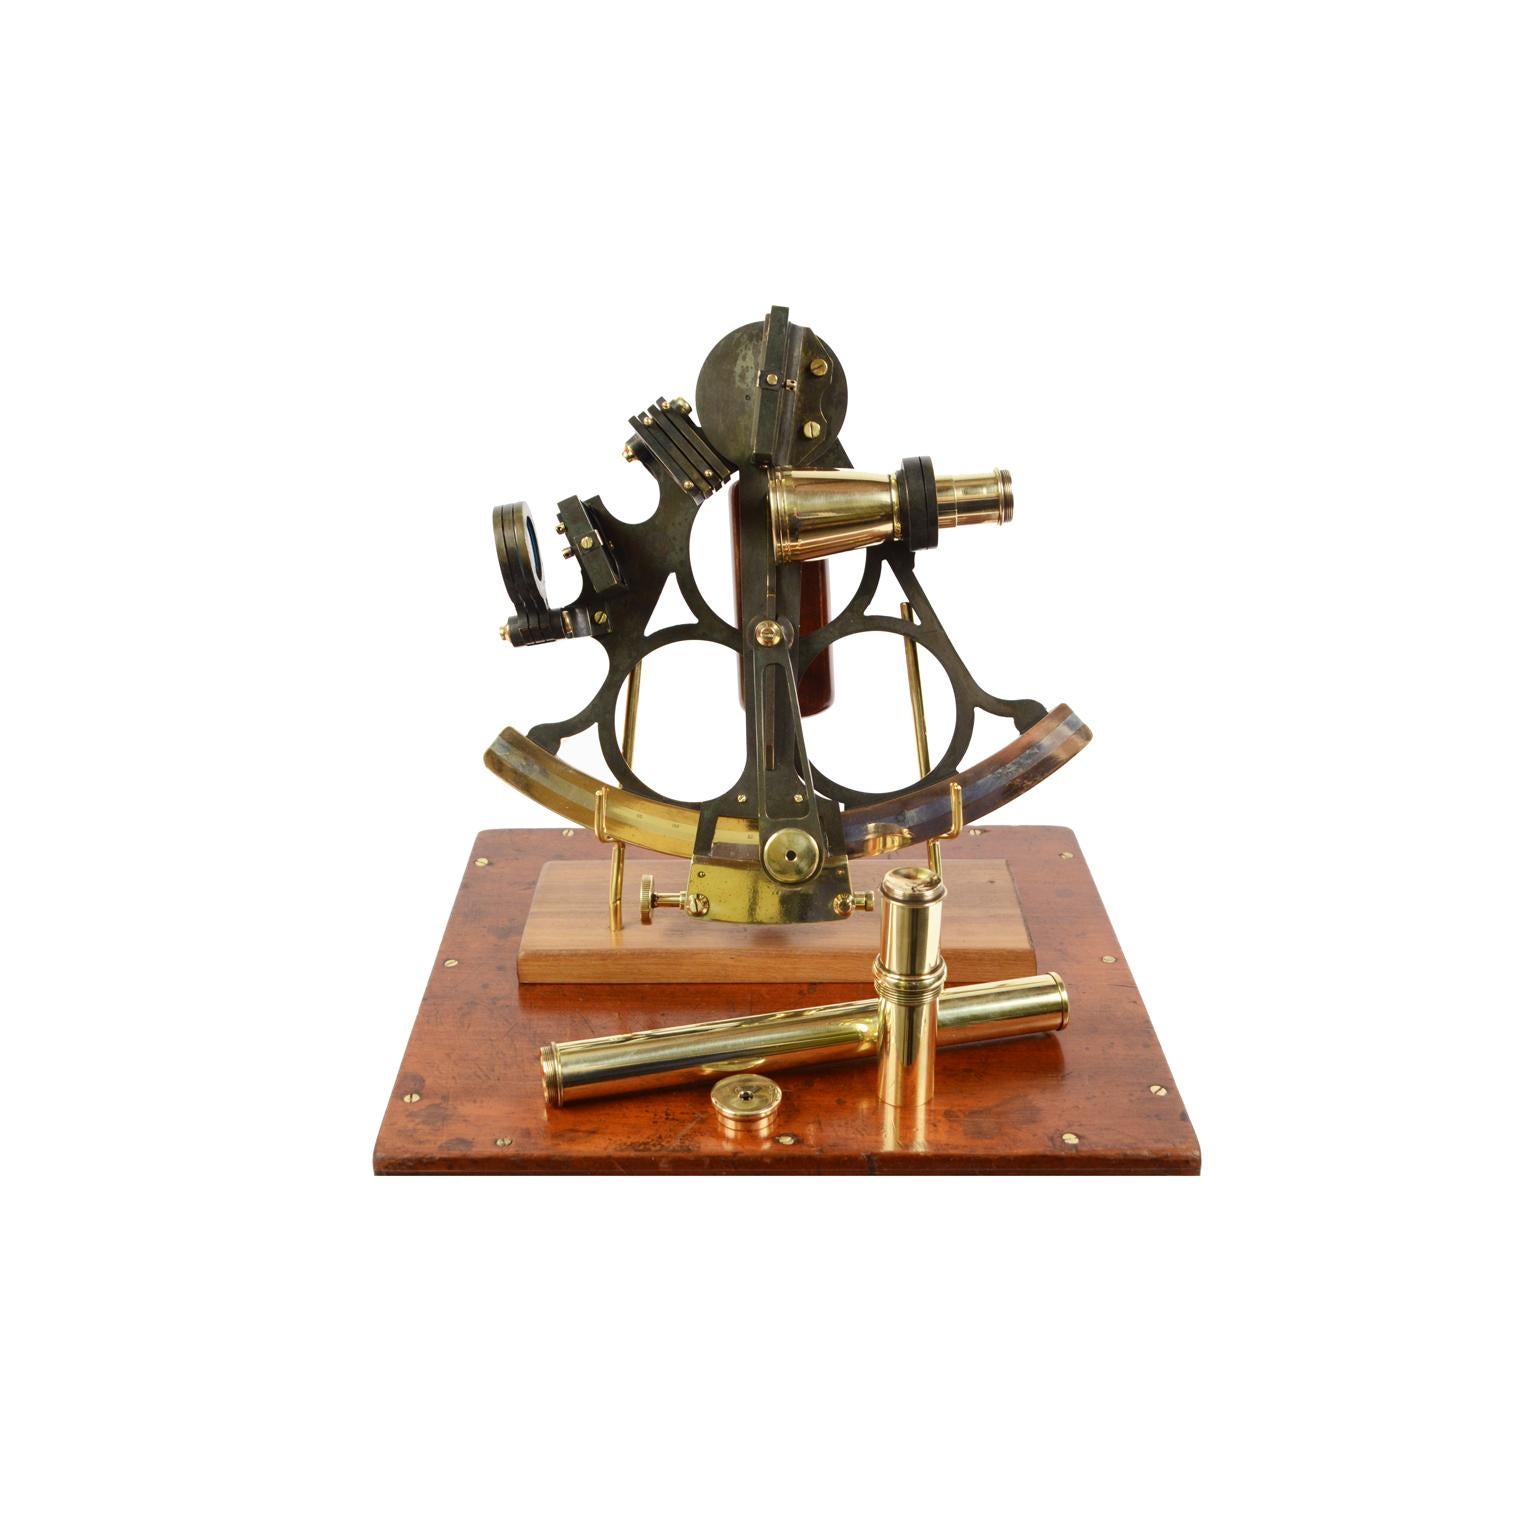 Burnished brass sextant from the early 1900s signed J. Parkes & Sons Liverpool n. 9601, and placed in its original oakwood box, complete with lock with key, hinges, hooks and brass handle. Flap and Vernier made of silver, mahogany handle, 3 colored